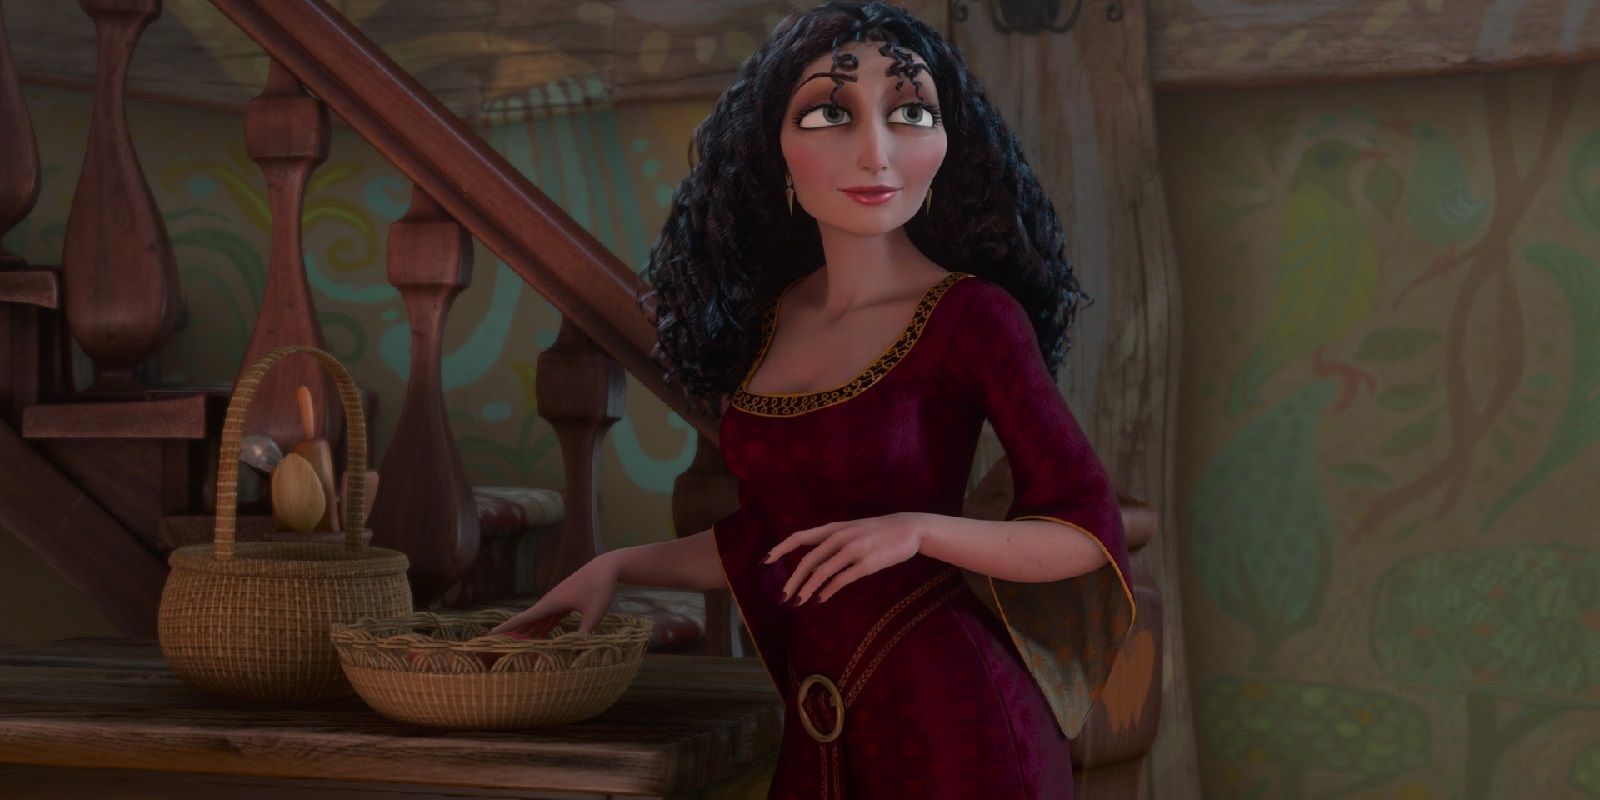 Mother Gothel standing on the stairs in Tangled